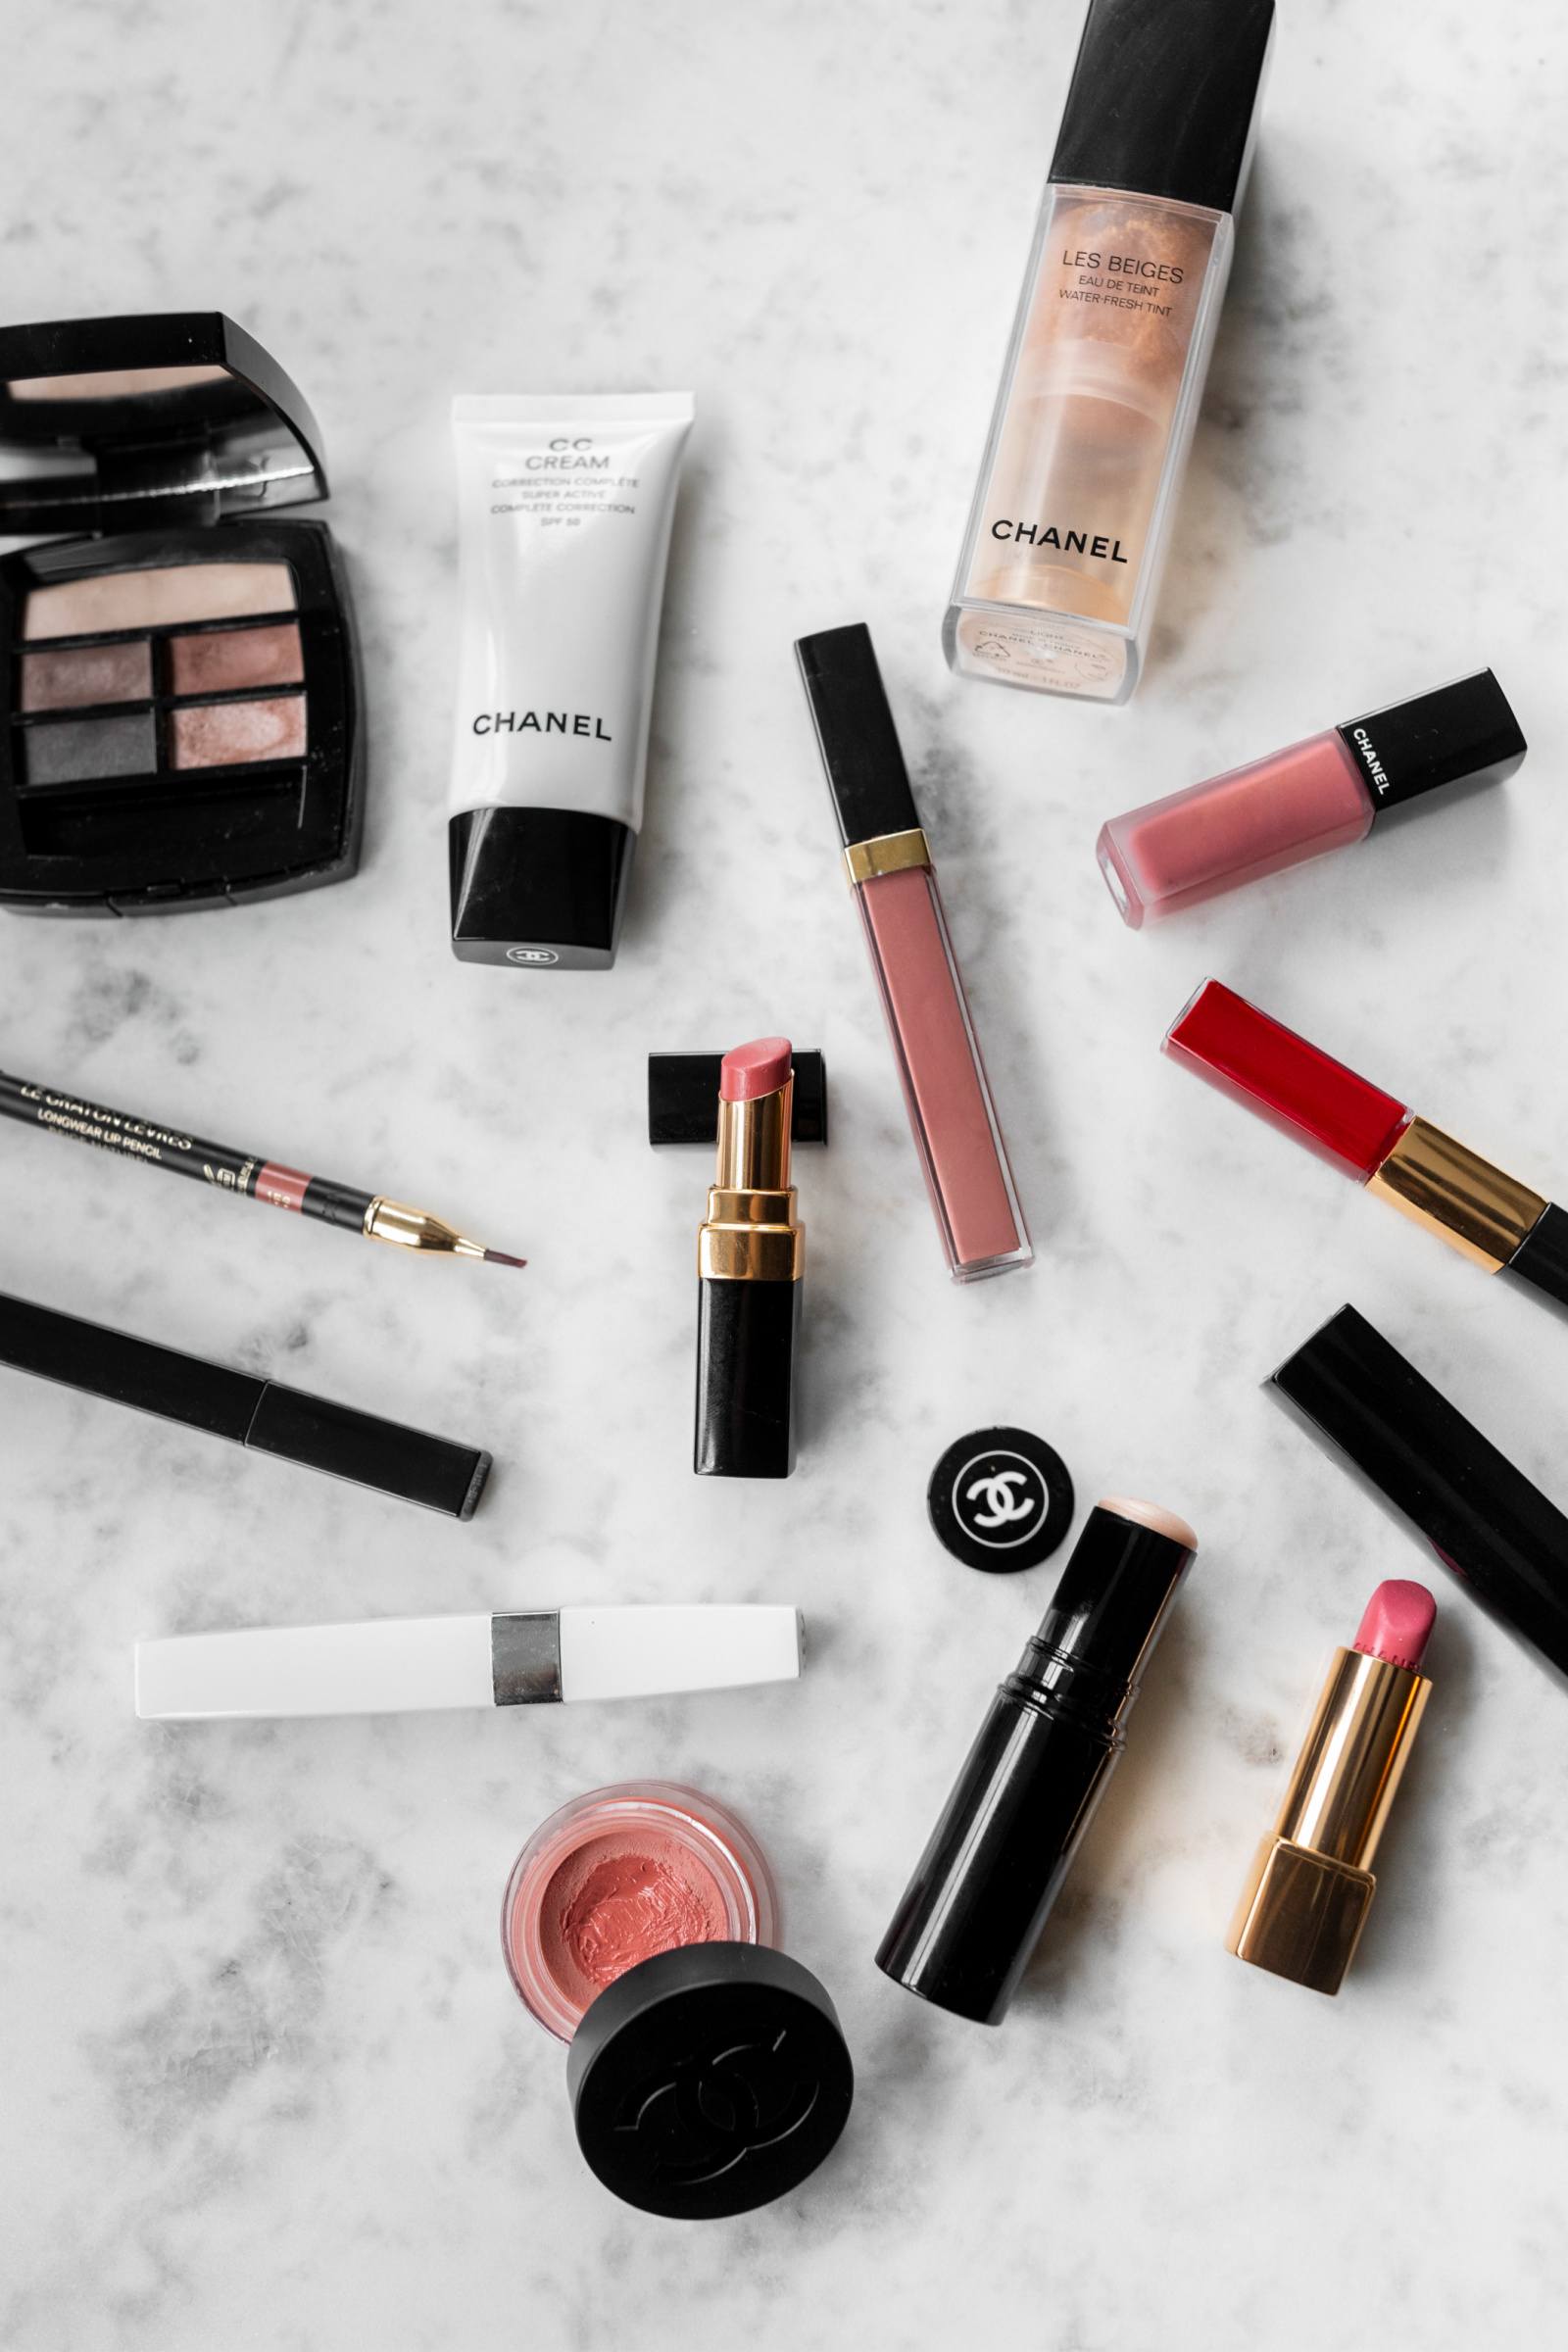 Chanel Makeup Review